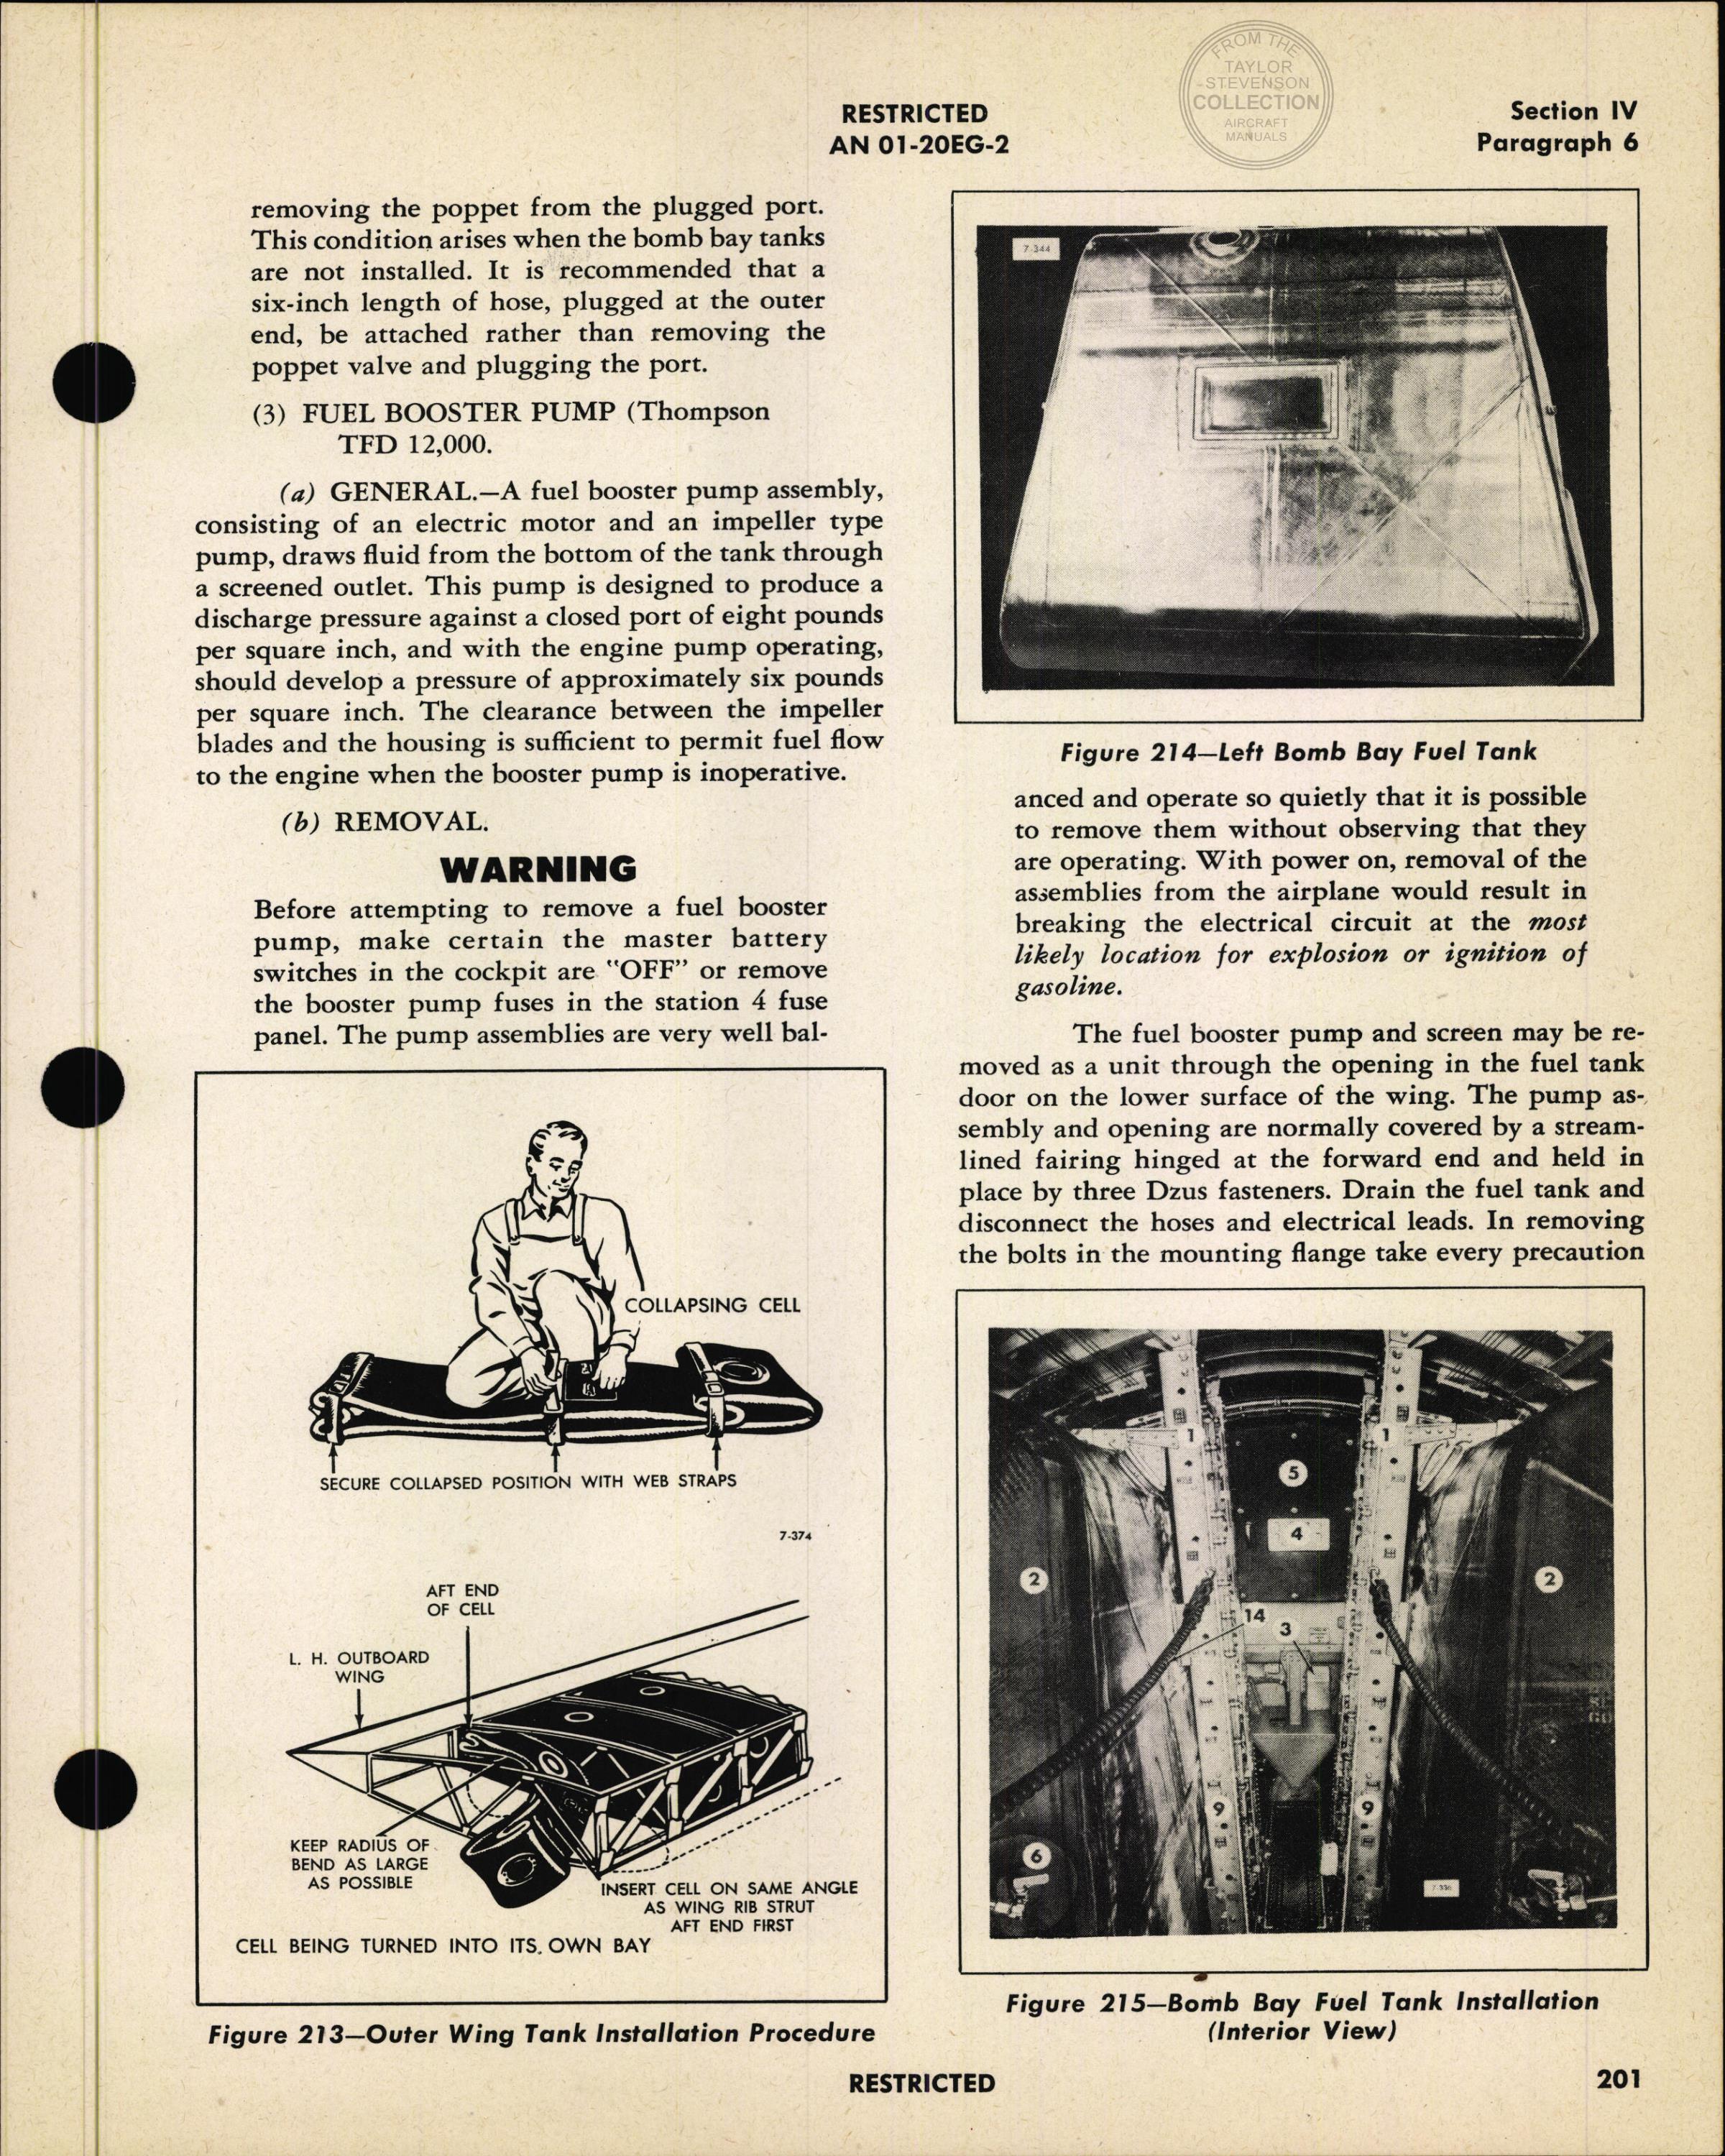 Sample page 210 from AirCorps Library document: Erection & Maintenance - B-17G - Oct 1944